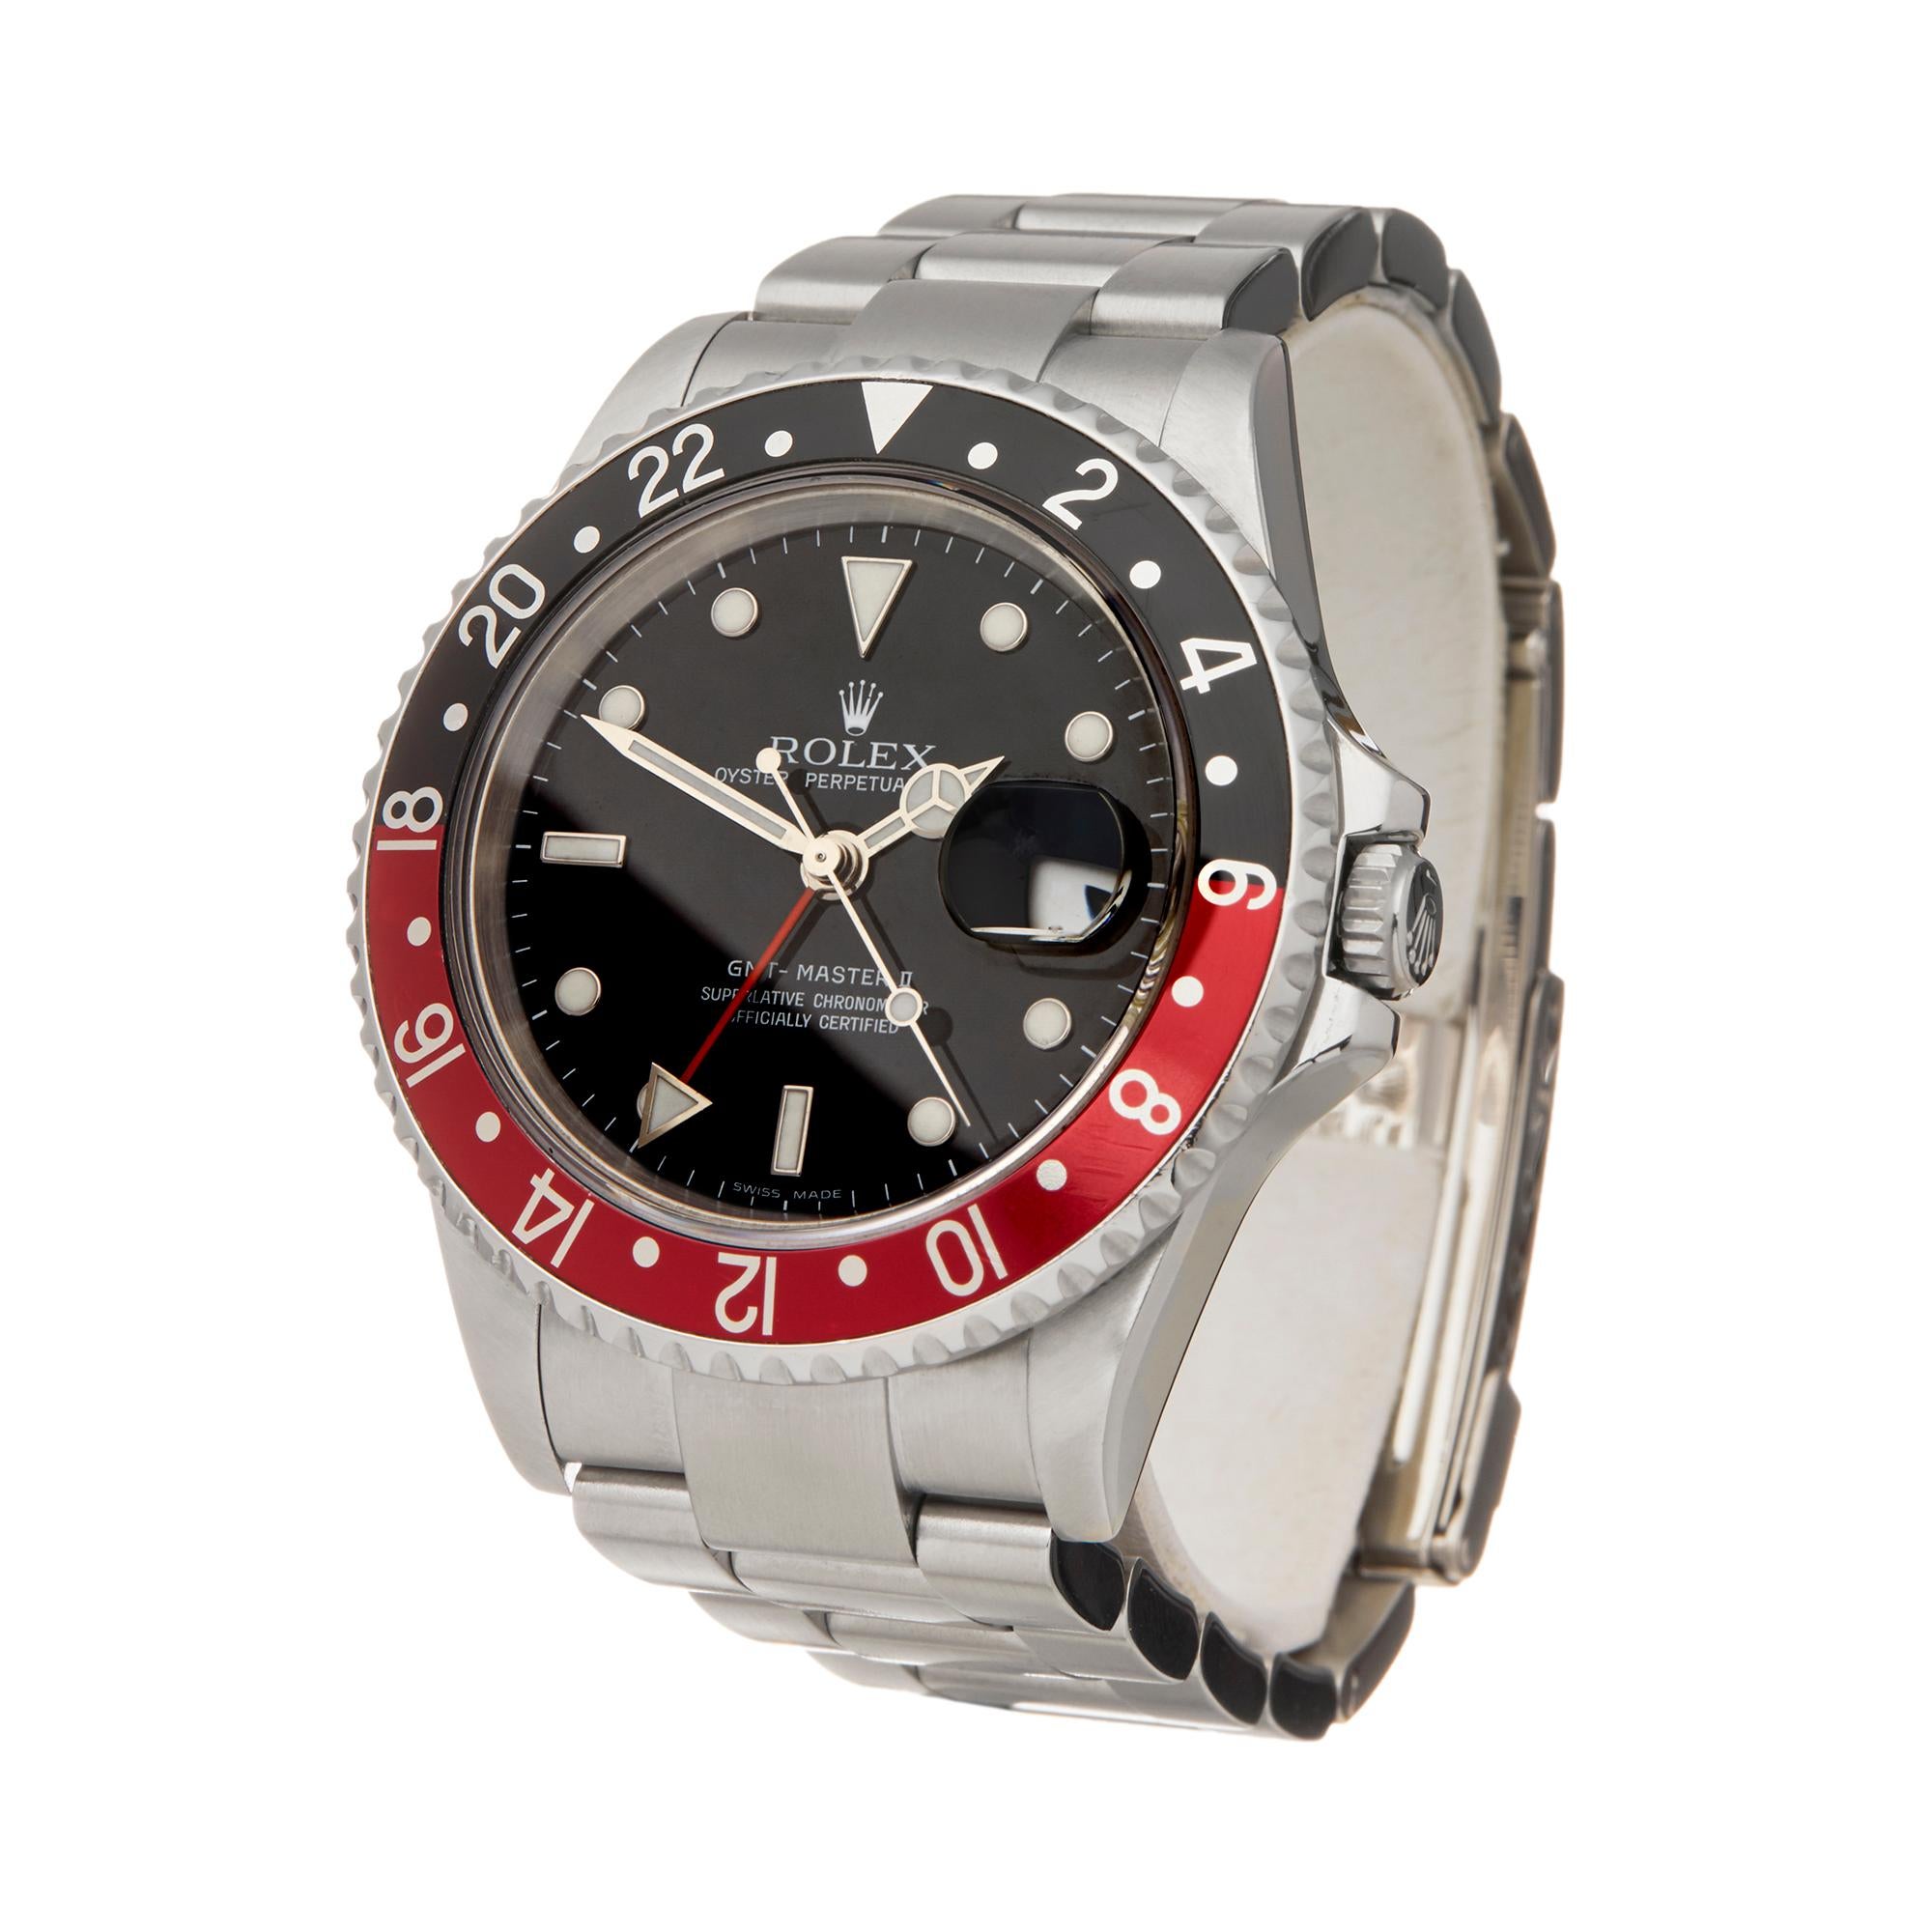 Reference: W6014
Manufacturer: Rolex
Model: GMT-Master II
Model Reference: 16710
Age: 1st June 2011
Gender: Men's
Box and Papers: Box, Manuals and Guarantee
Dial: Black
Glass: Sapphire Crystal
Movement: Automatic
Water Resistance: To Manufacturers